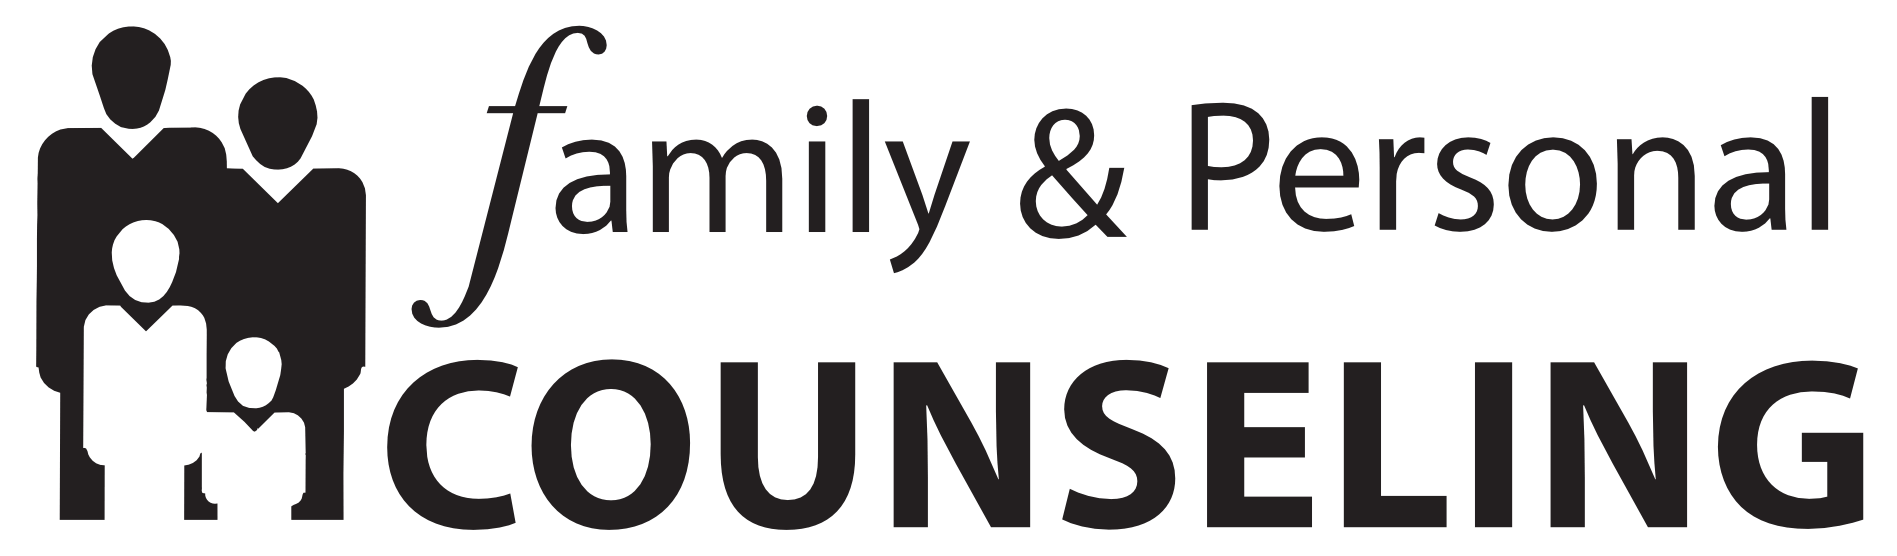 Family and Personal Counseling